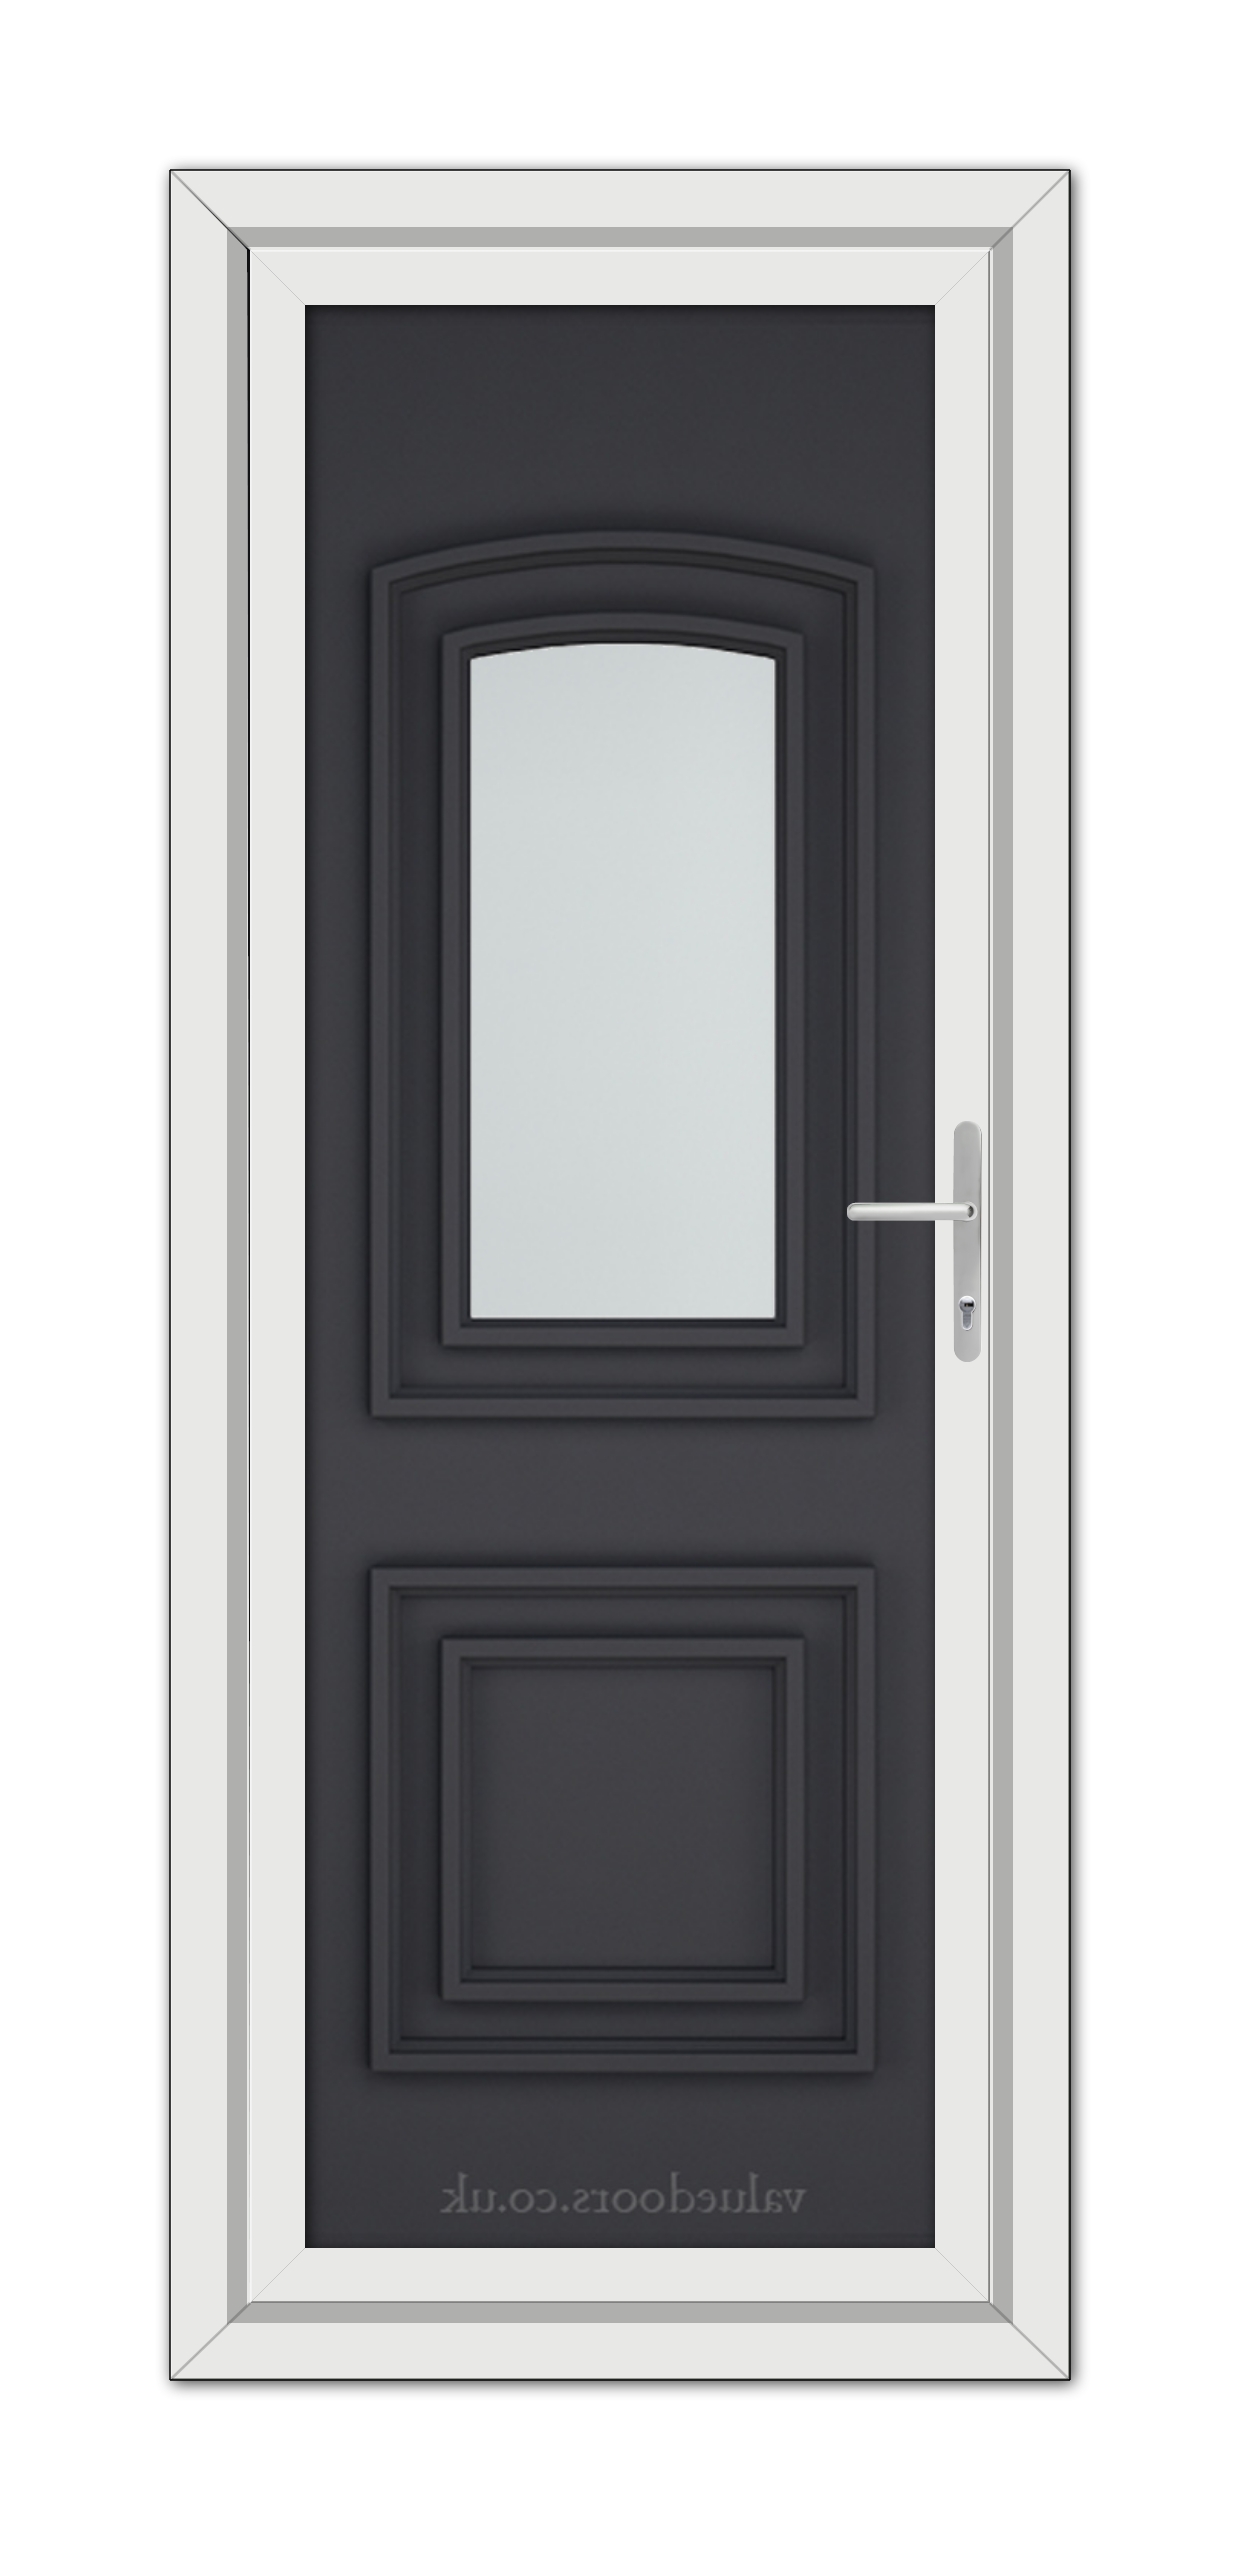 A modern, Grey Balmoral One uPVC door with a vertical window, framed by a white doorframe and featuring a metallic handle on the right side.